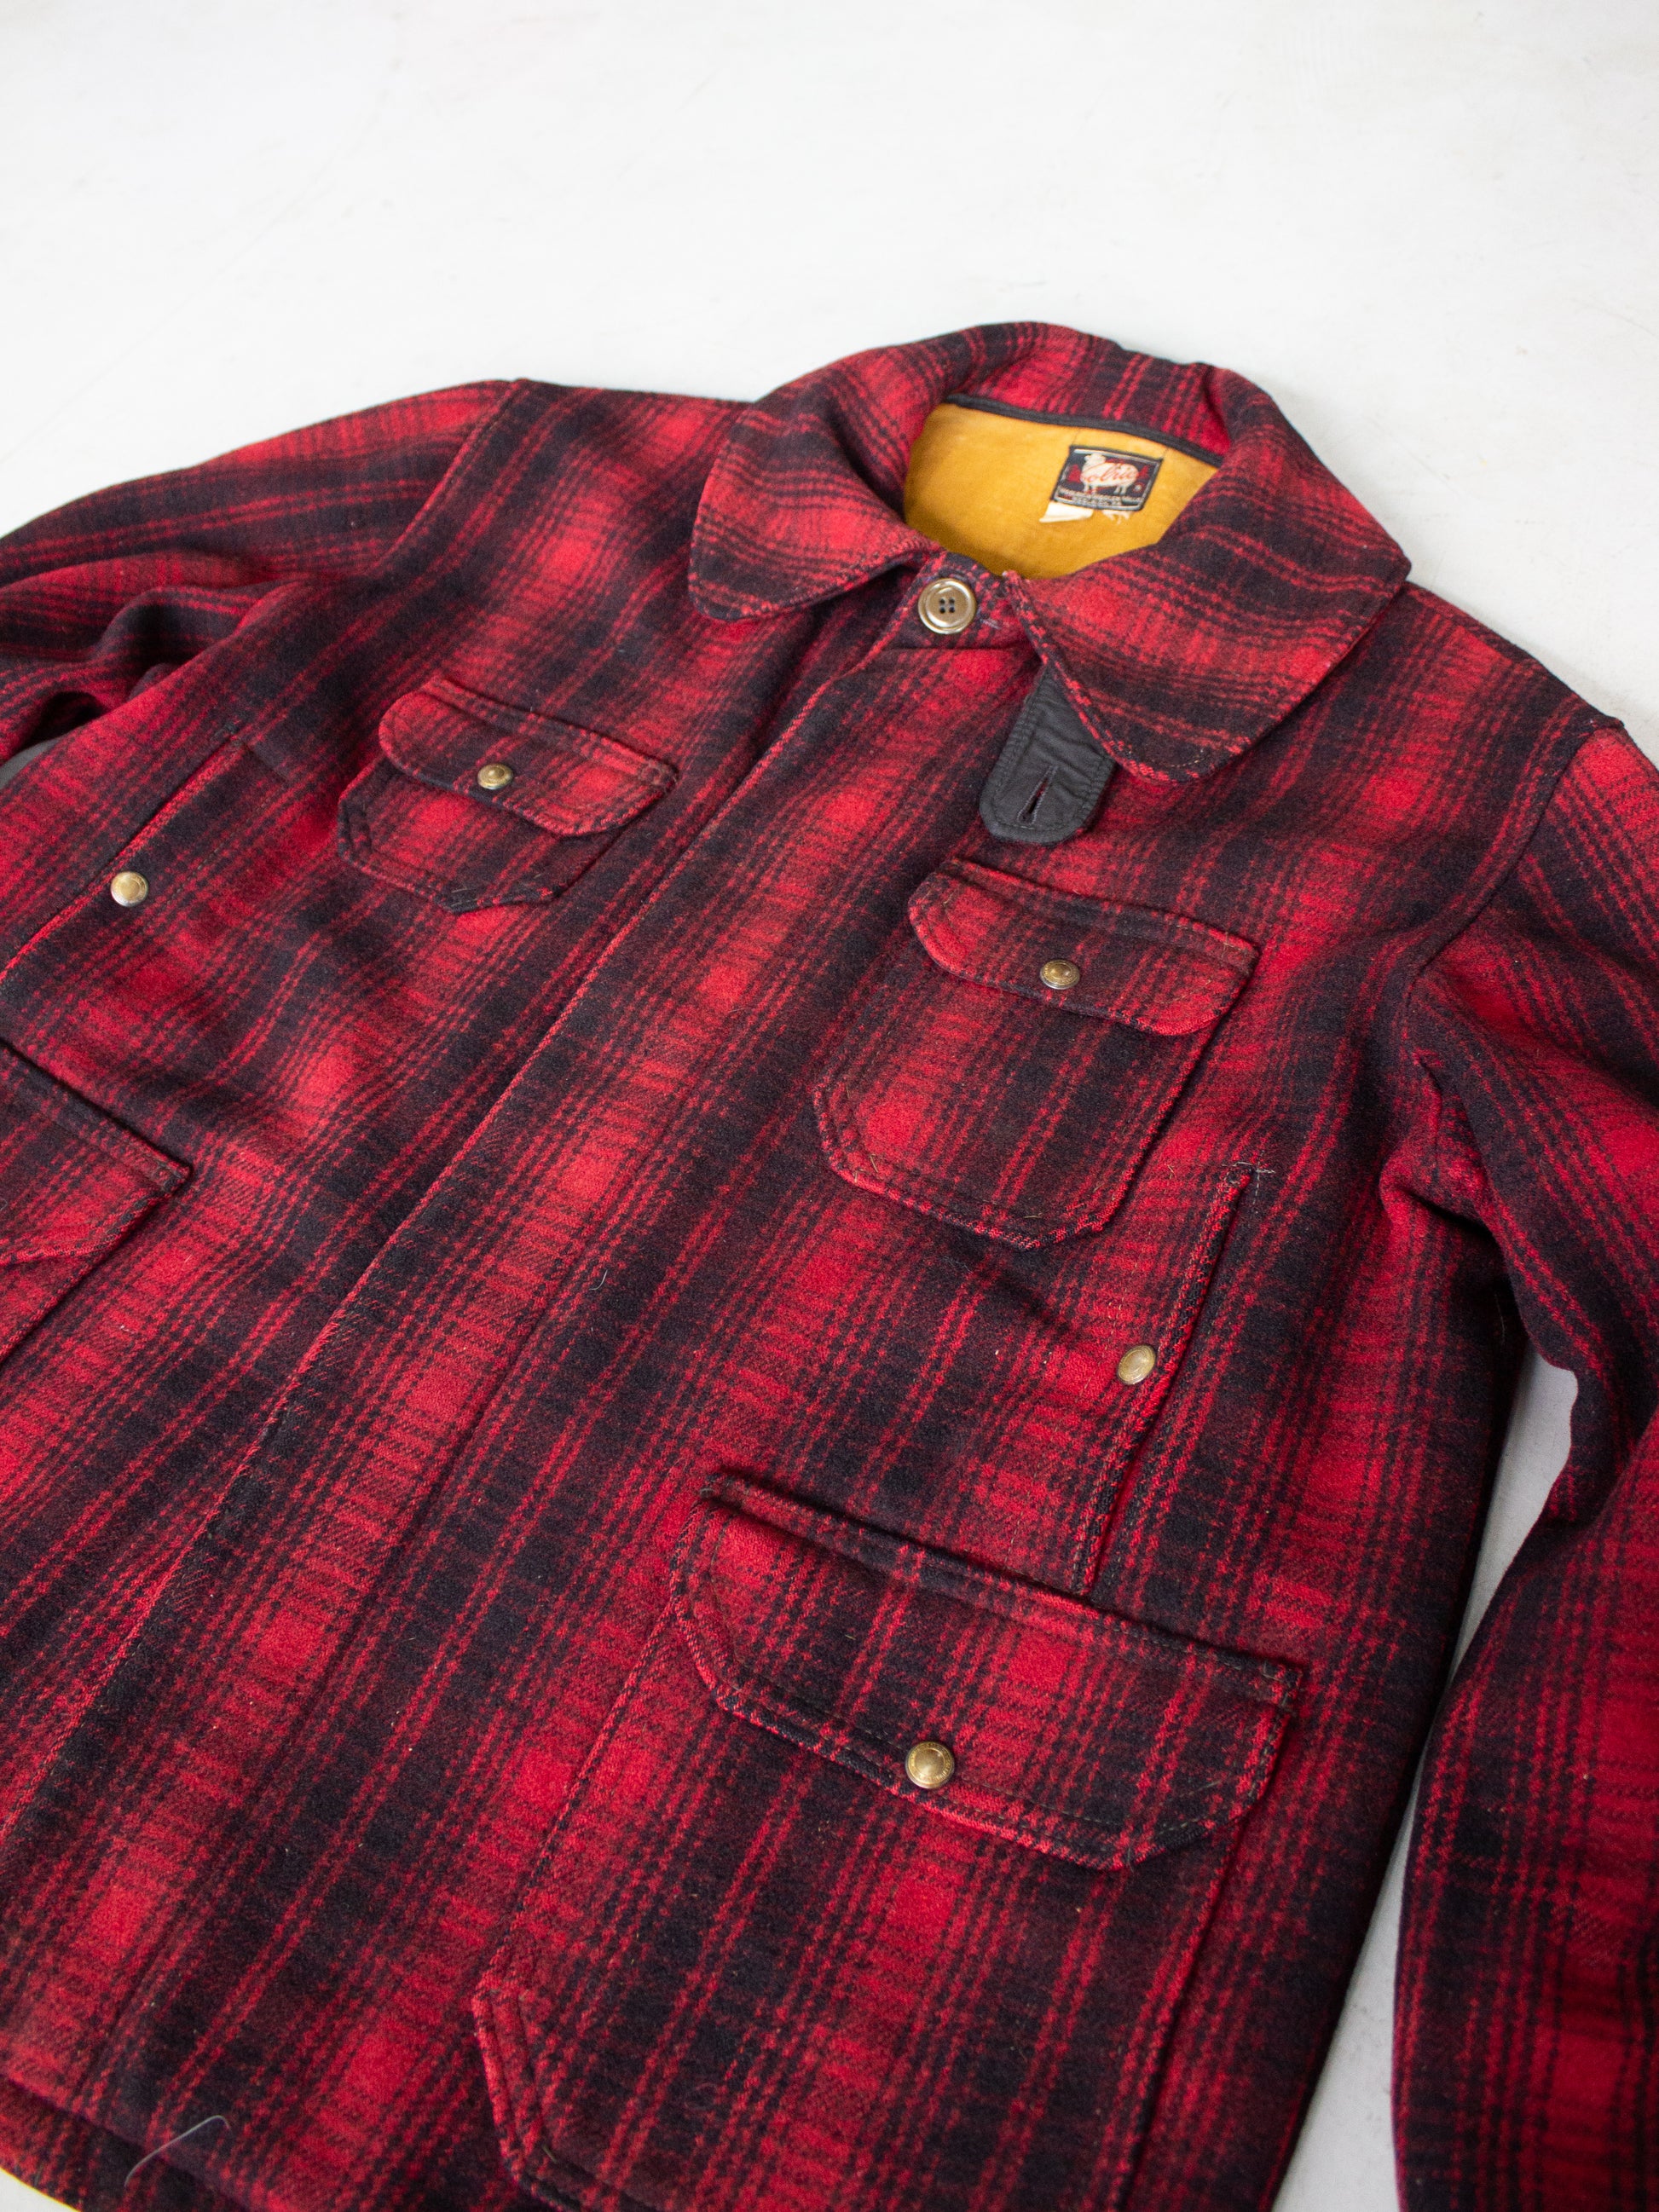 Vintage 1950's Woolrich Red Buffalo Plaid Hunting Jacket Style 503